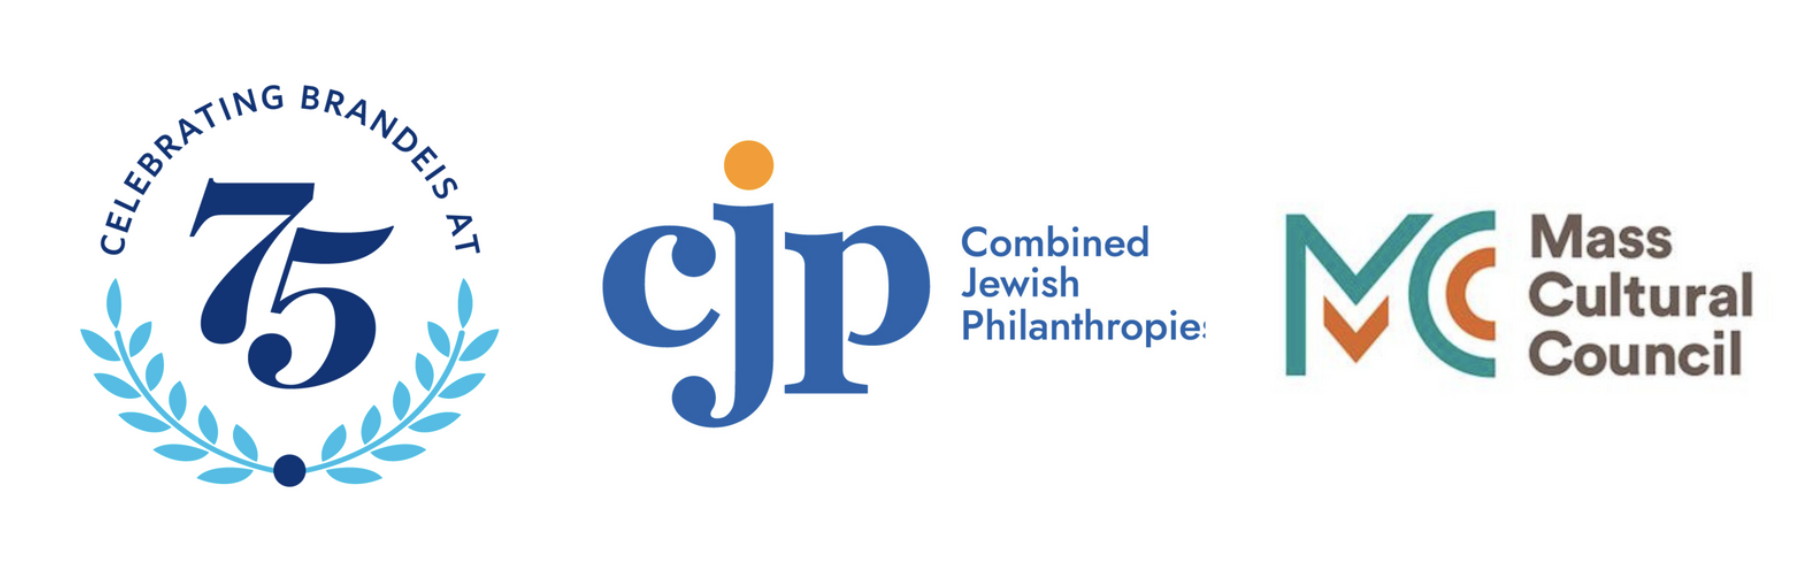 The first logo is circular image that says "Celebrating Brandeis at 75", the second logo is a linear image that says "CJP, Combined Jewish Philanthropies, the third logo is an linear image that says "Mass Cultural Council"